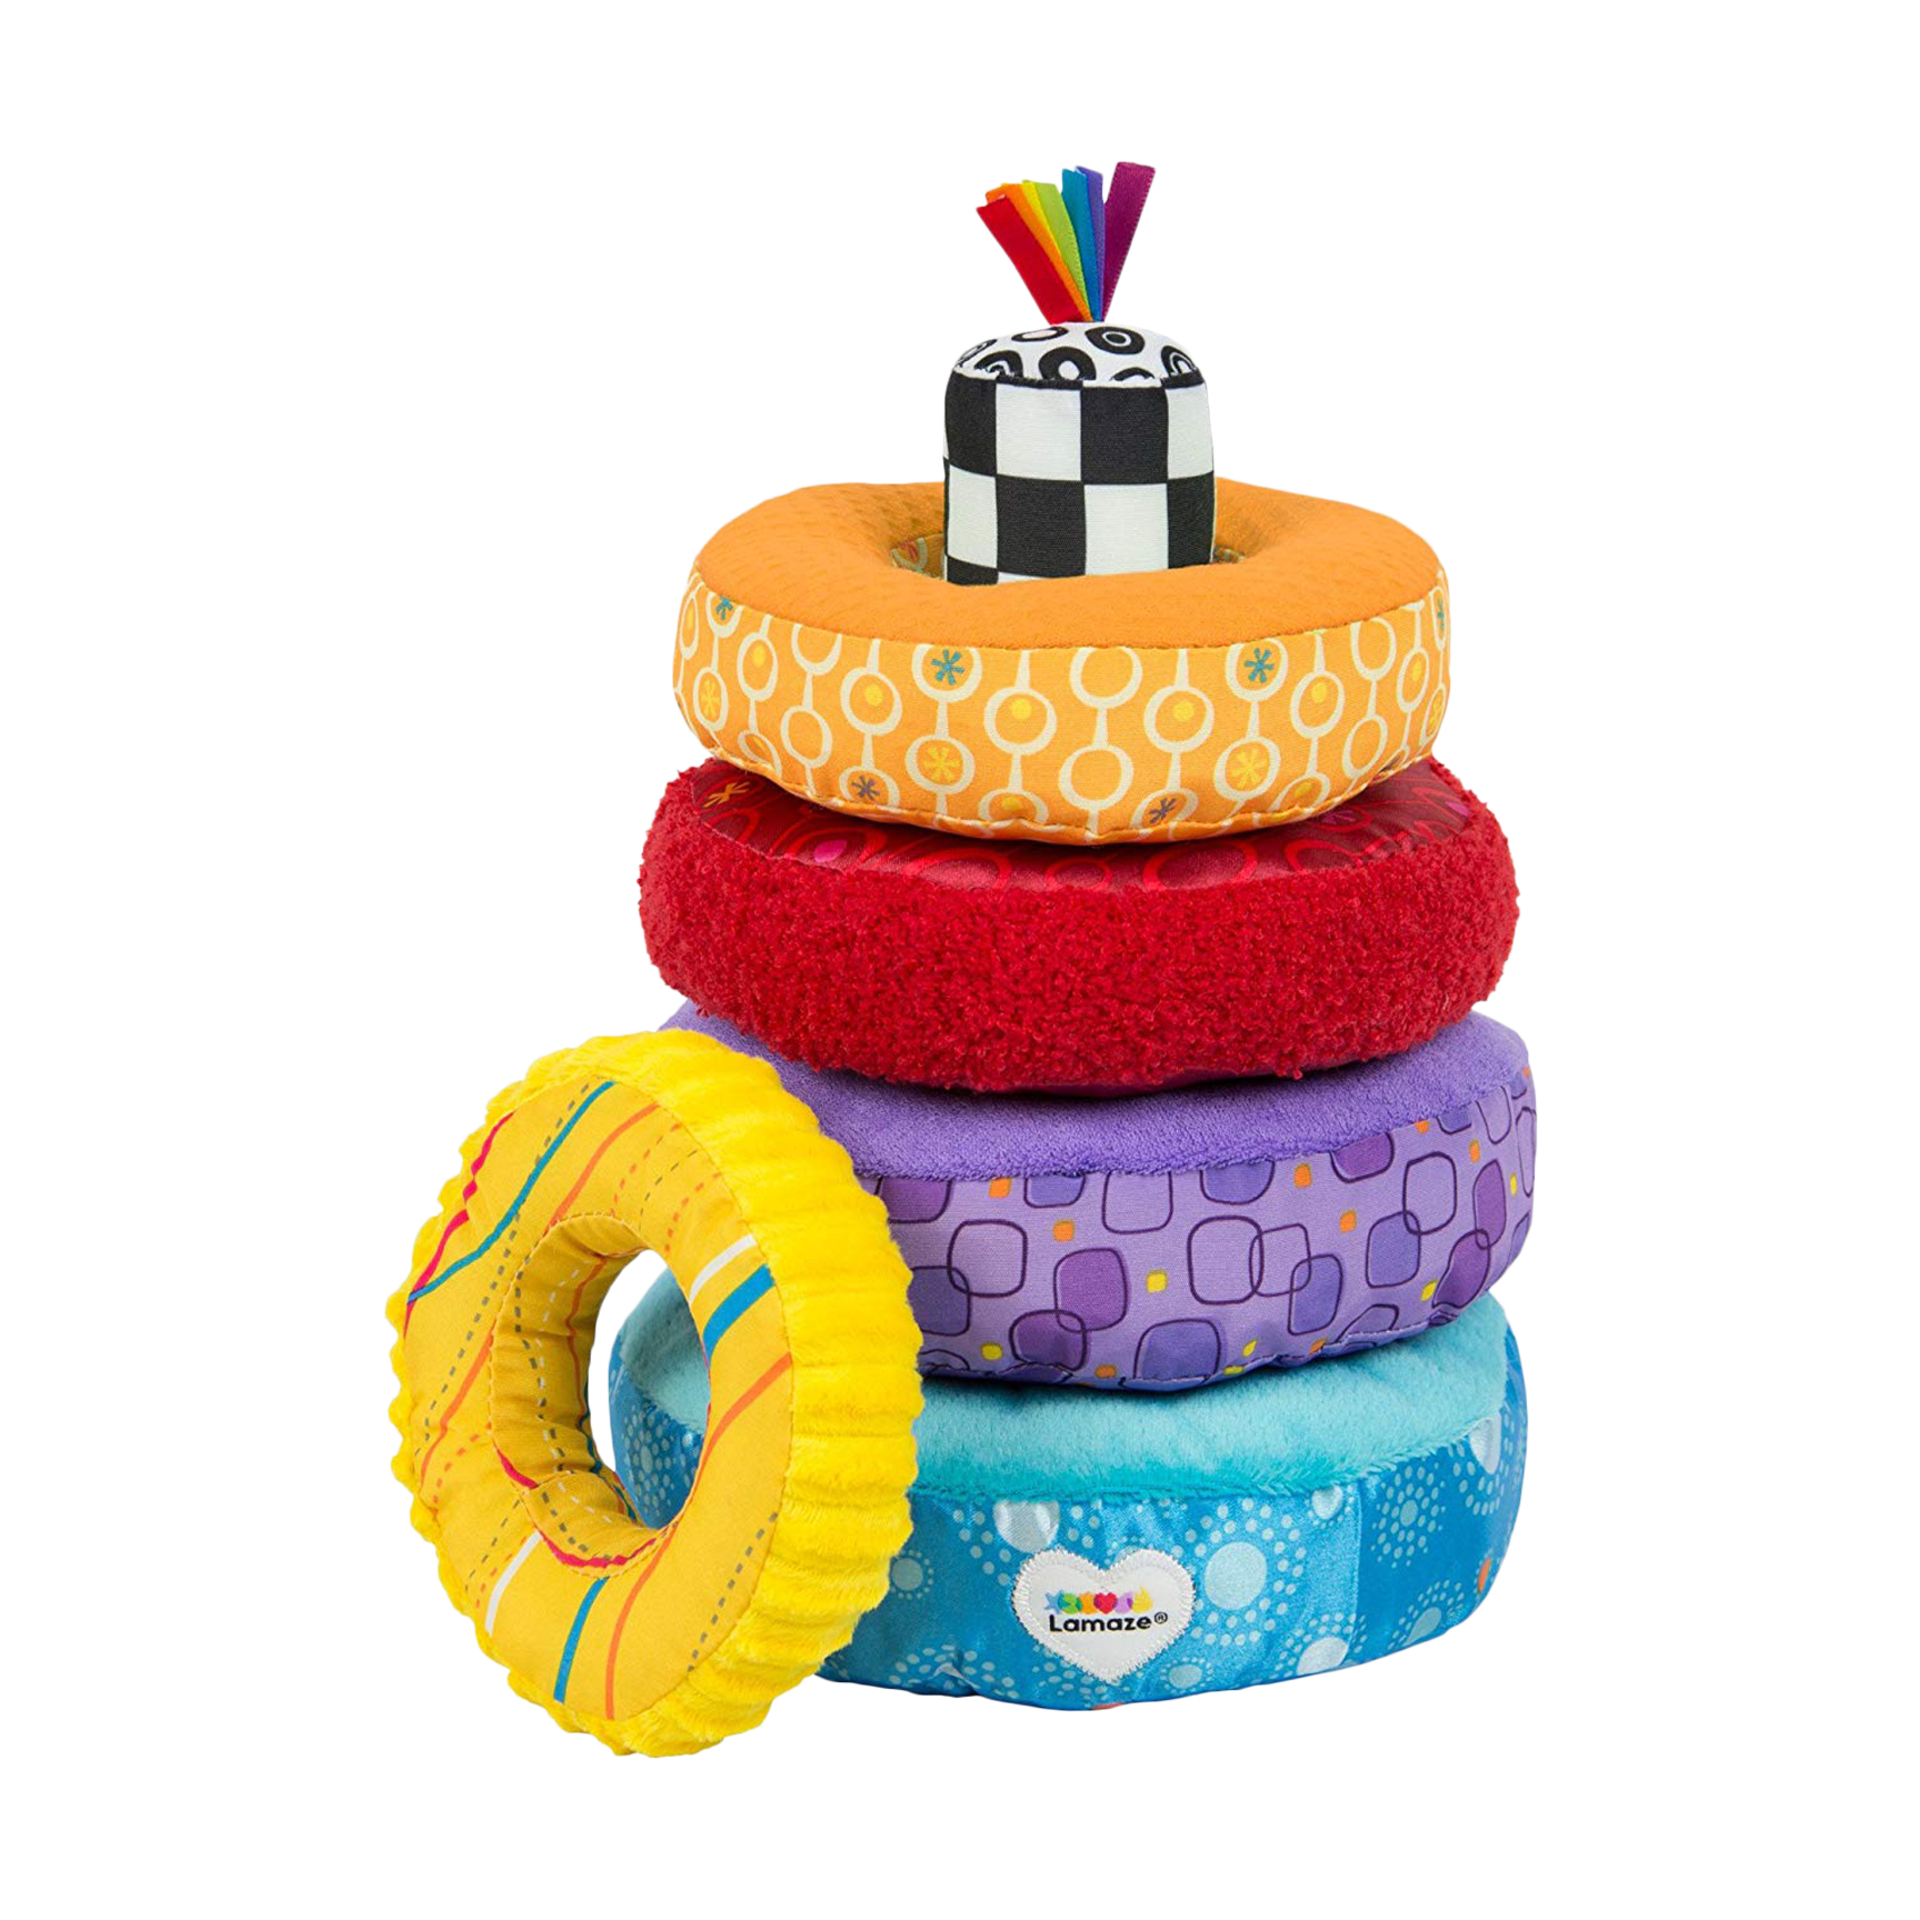 stackable ring toy